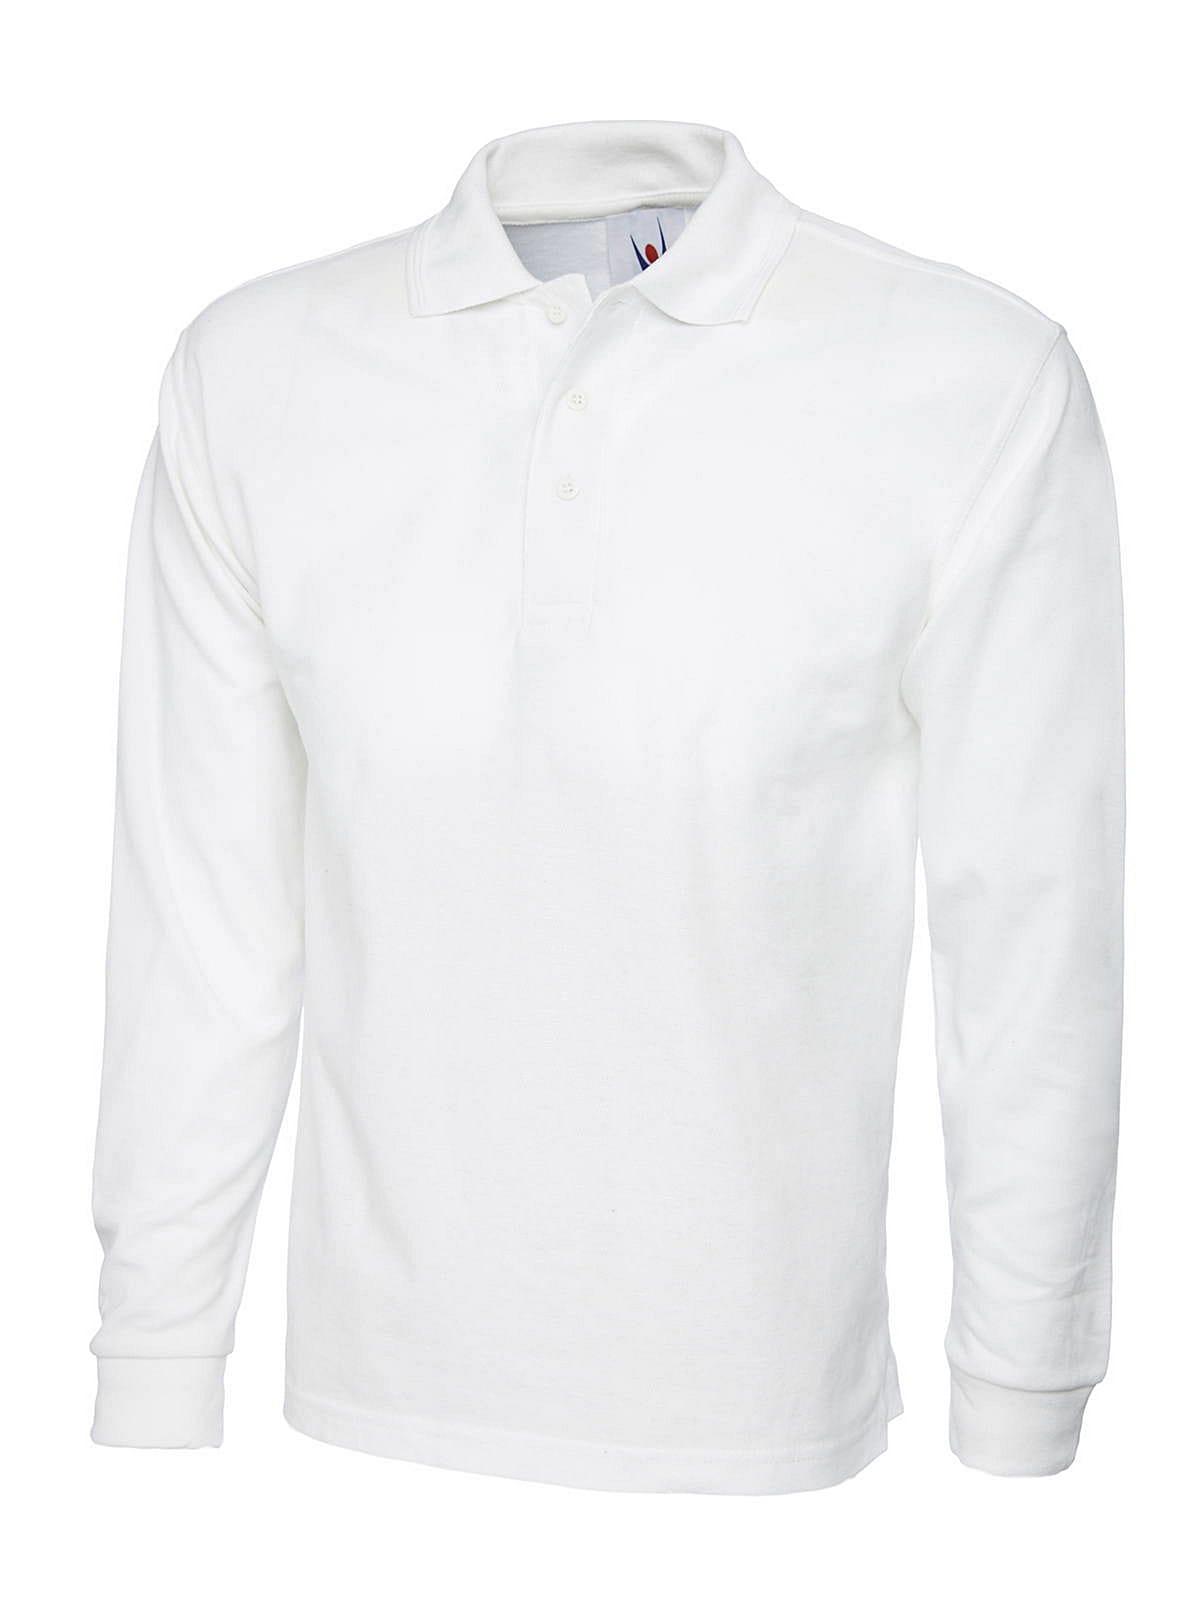 Uneek 220GSM Long-Sleeve Polo Shirt in White (Product Code: UC113)